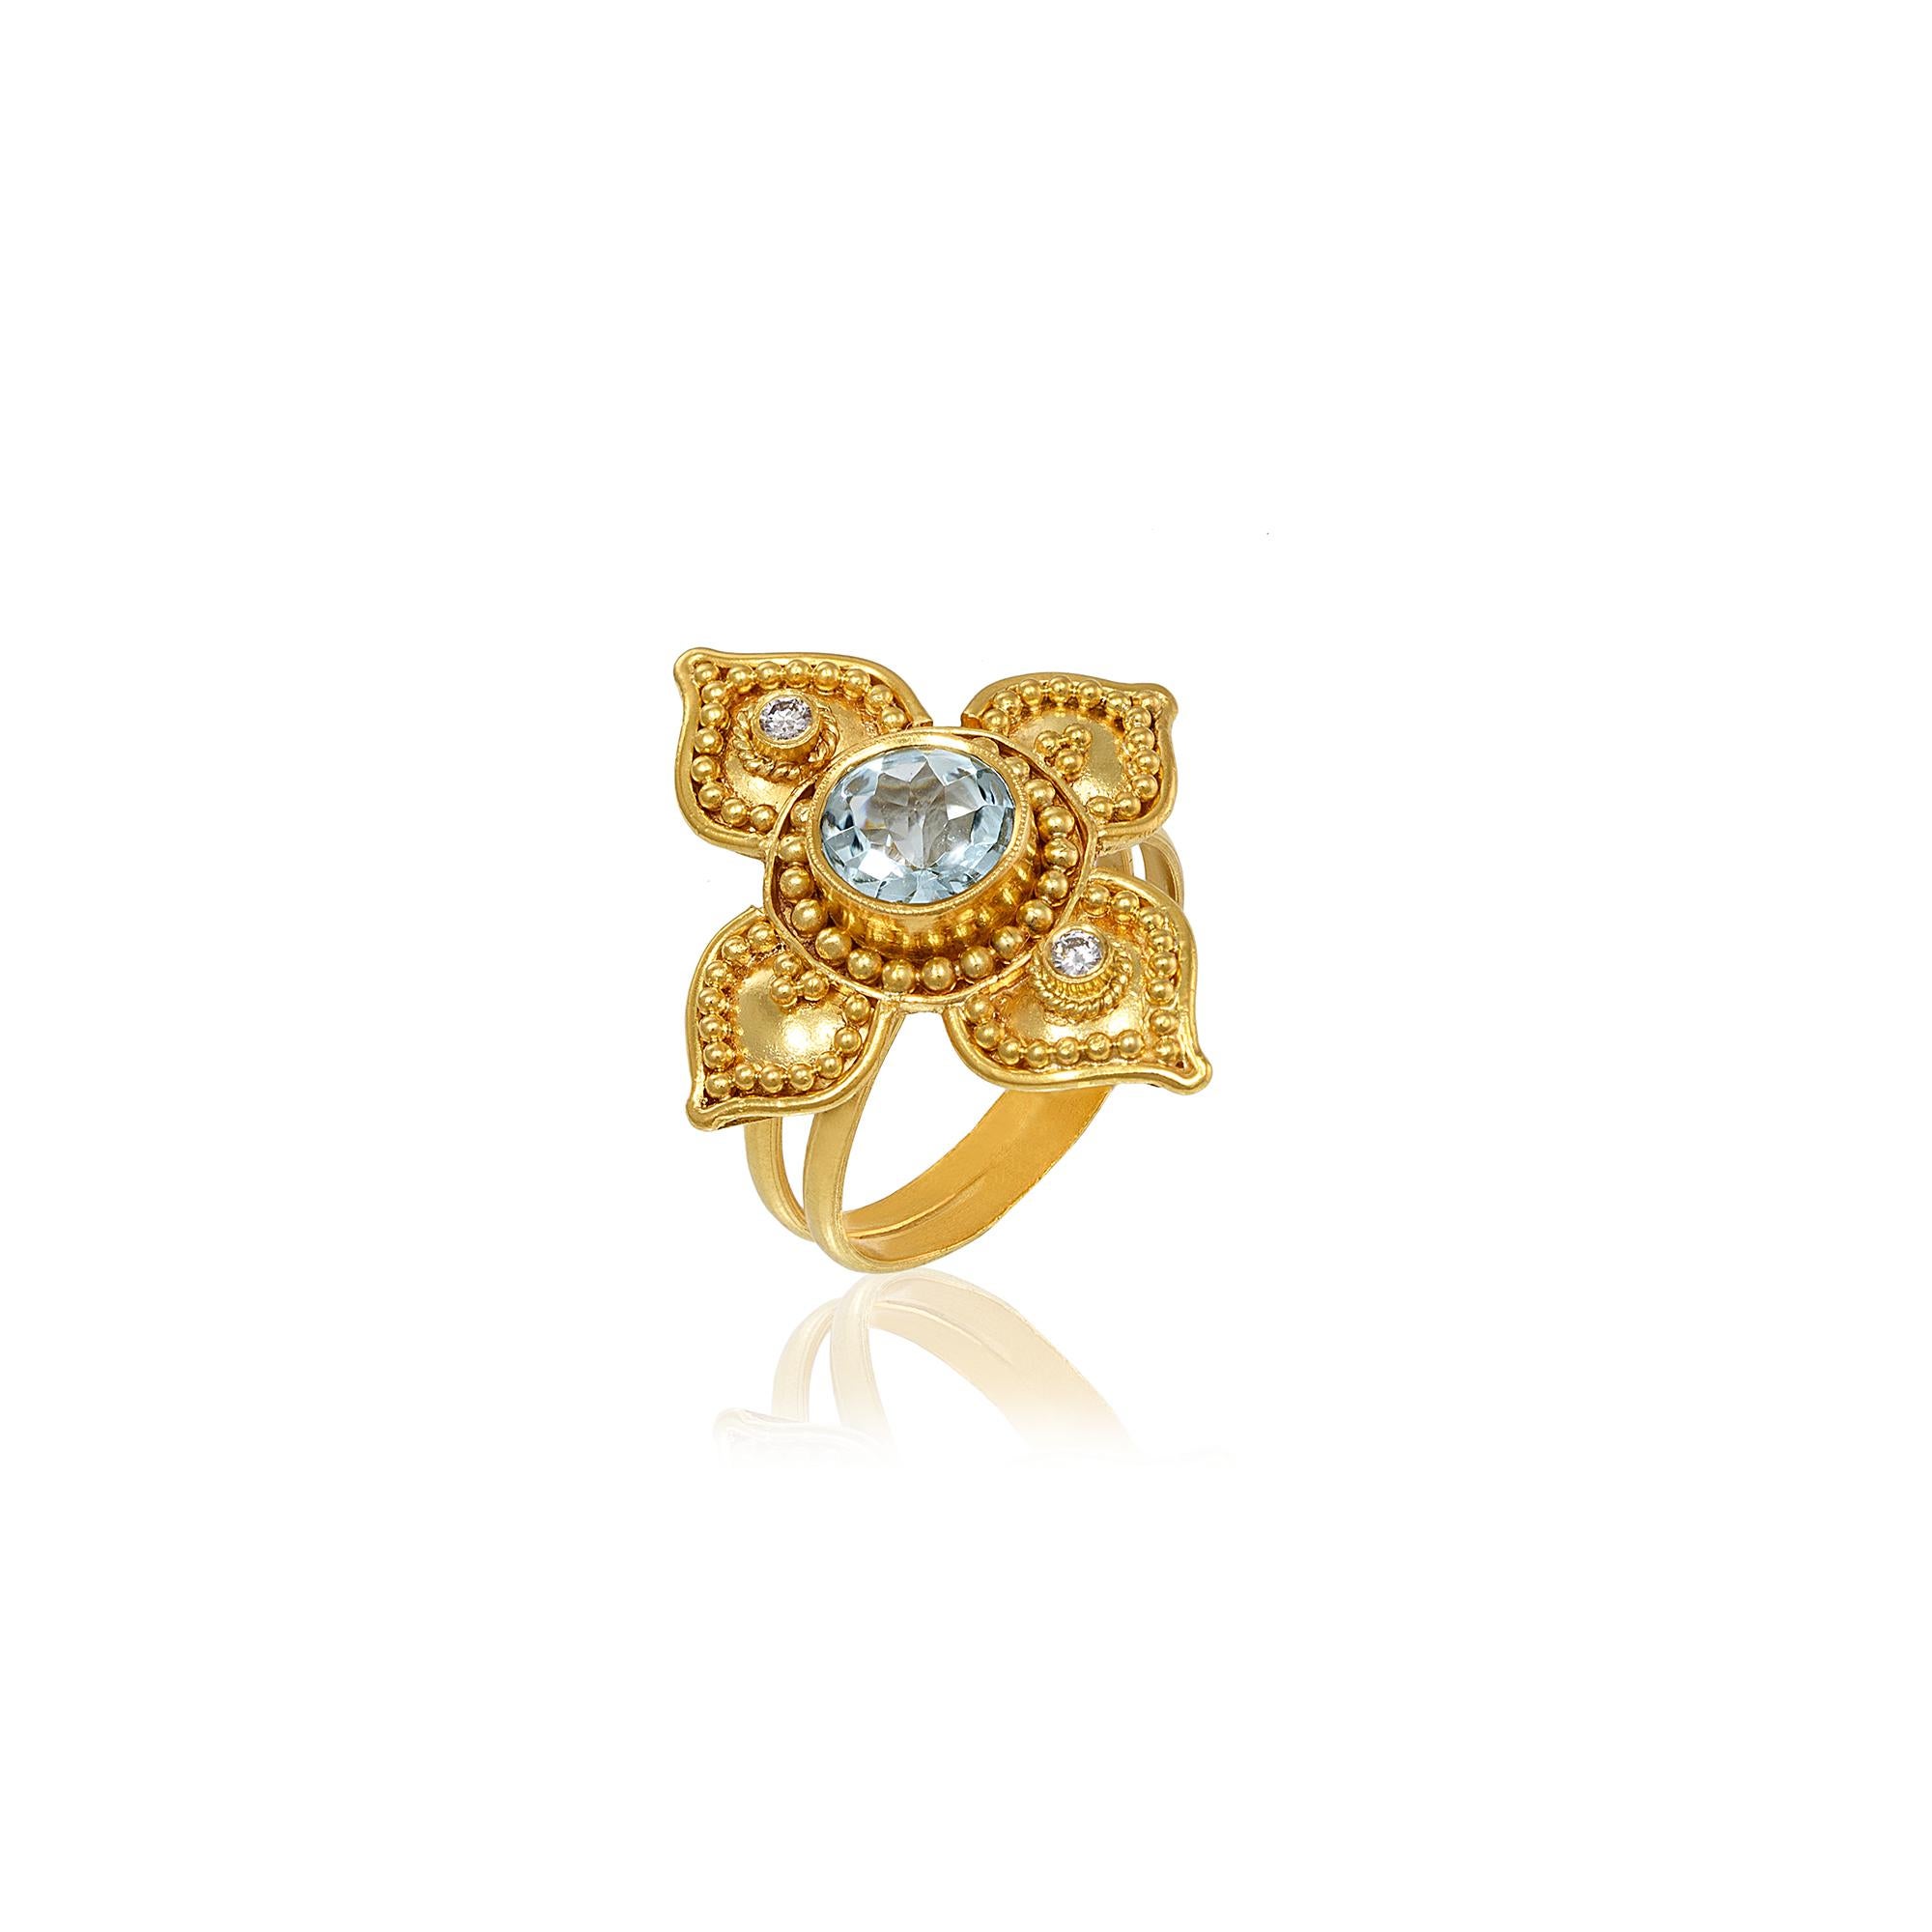 Byzantine four-petal flower cocktail ring handcrafted in 22Kt yellow gold, featuring an Aquamarine center and two brilliant cut diamonds on the petals. Granulation and Filigree techniques are applied in bold ways to create exquisite pieces of